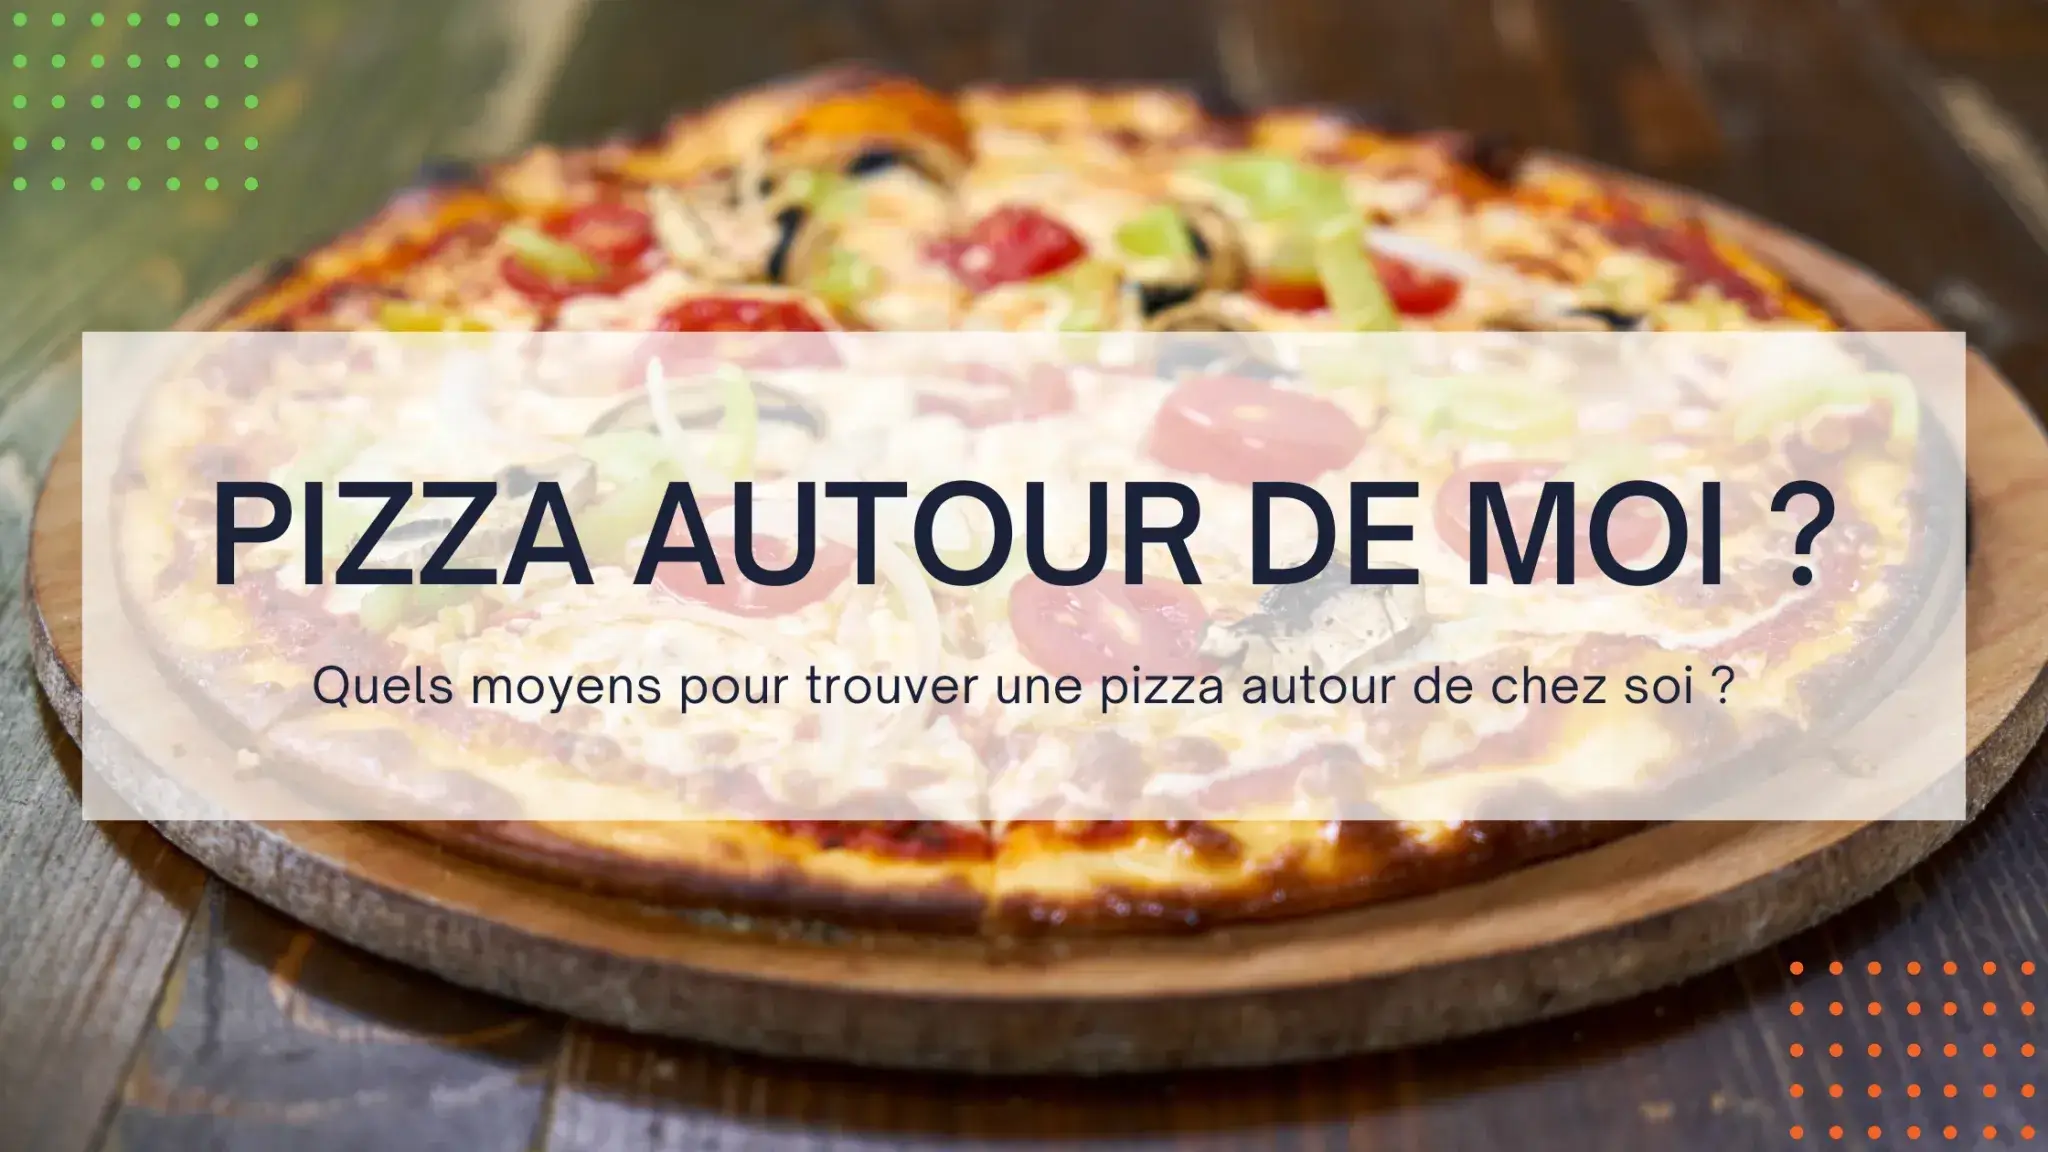 You are currently viewing Pizza autour de moi ?